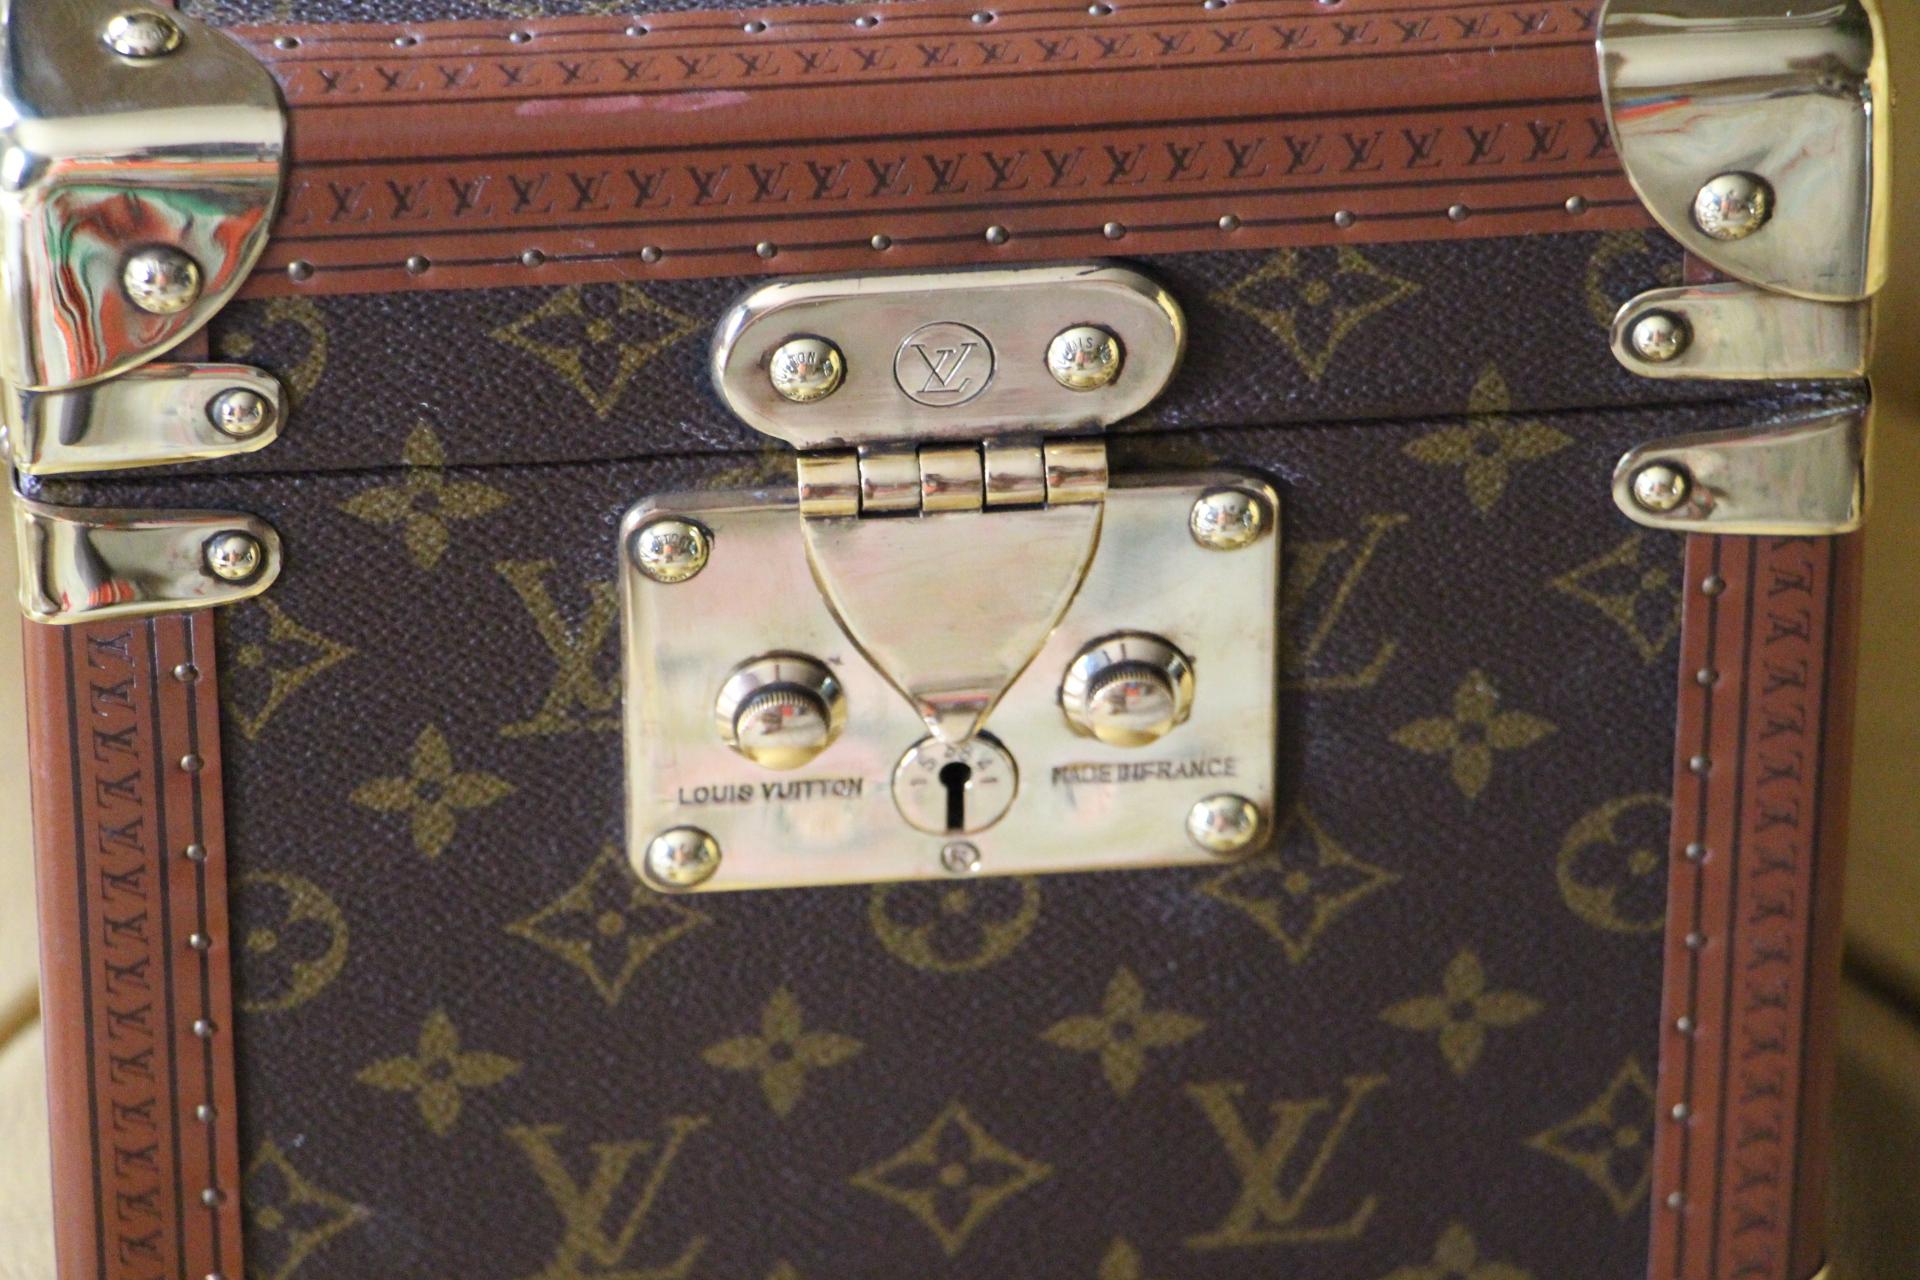 Very nice Louis Vuitton monogram train case with solid brass corners and lock.

Leather top handle.

All its studs are engraved Louis Vuitton.

Its interior is in very good condition too.

H 8.27 in. x W 8.67 in. x D 11.82 in.
H 21 cm x W 22 cm x D